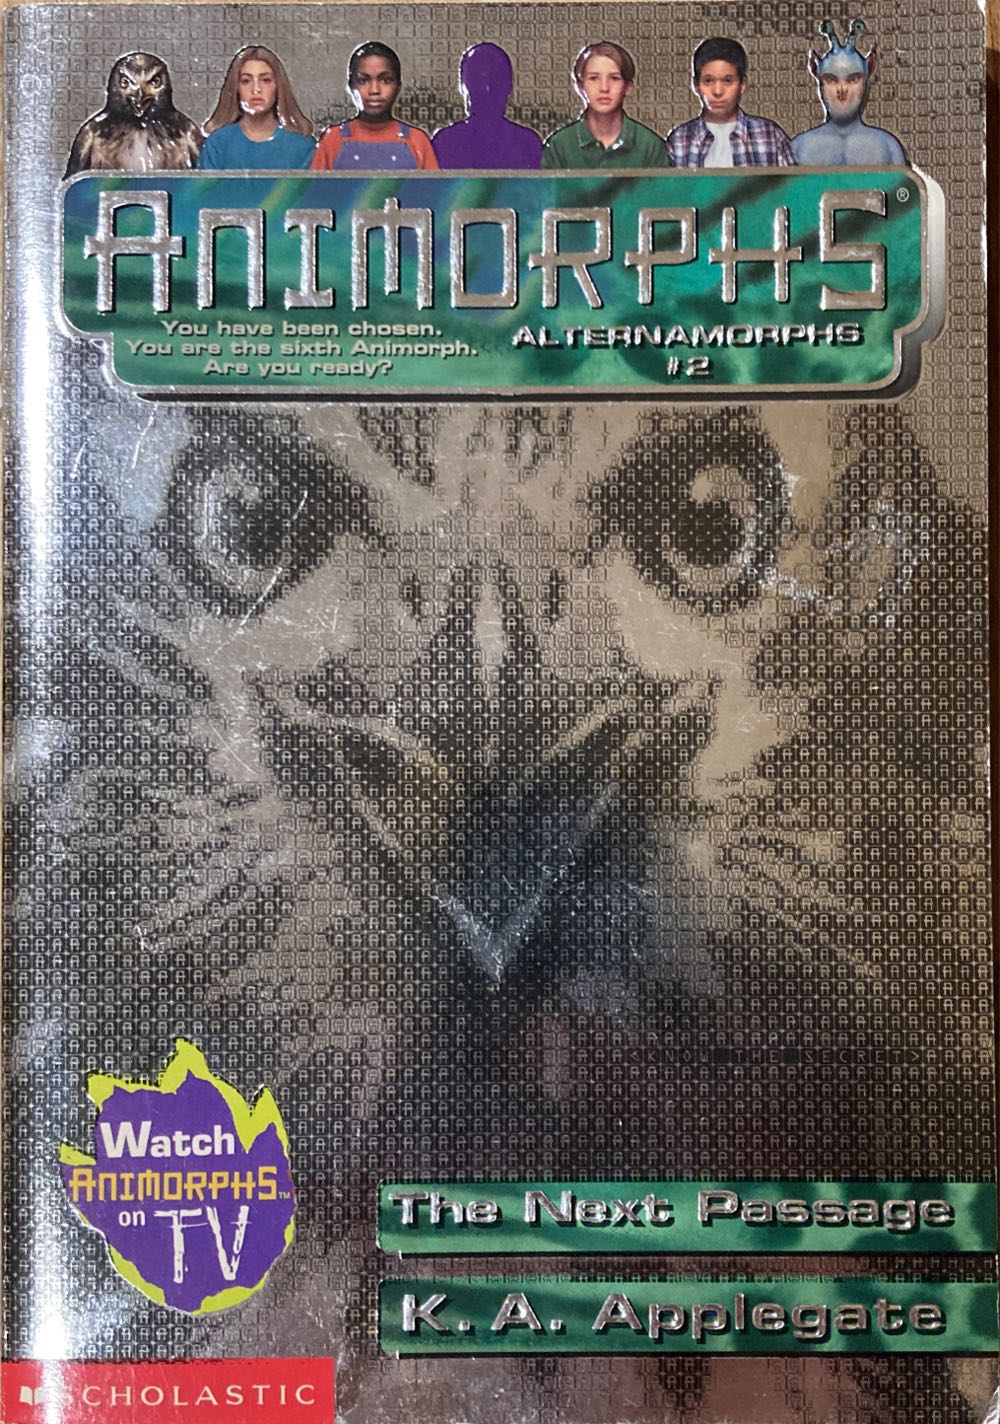 Animorphs: Alternamorphs #2:The Next Passage - K. A. Applegate (Apple - Paperback) book collectible [Barcode 9780439142632] - Main Image 3